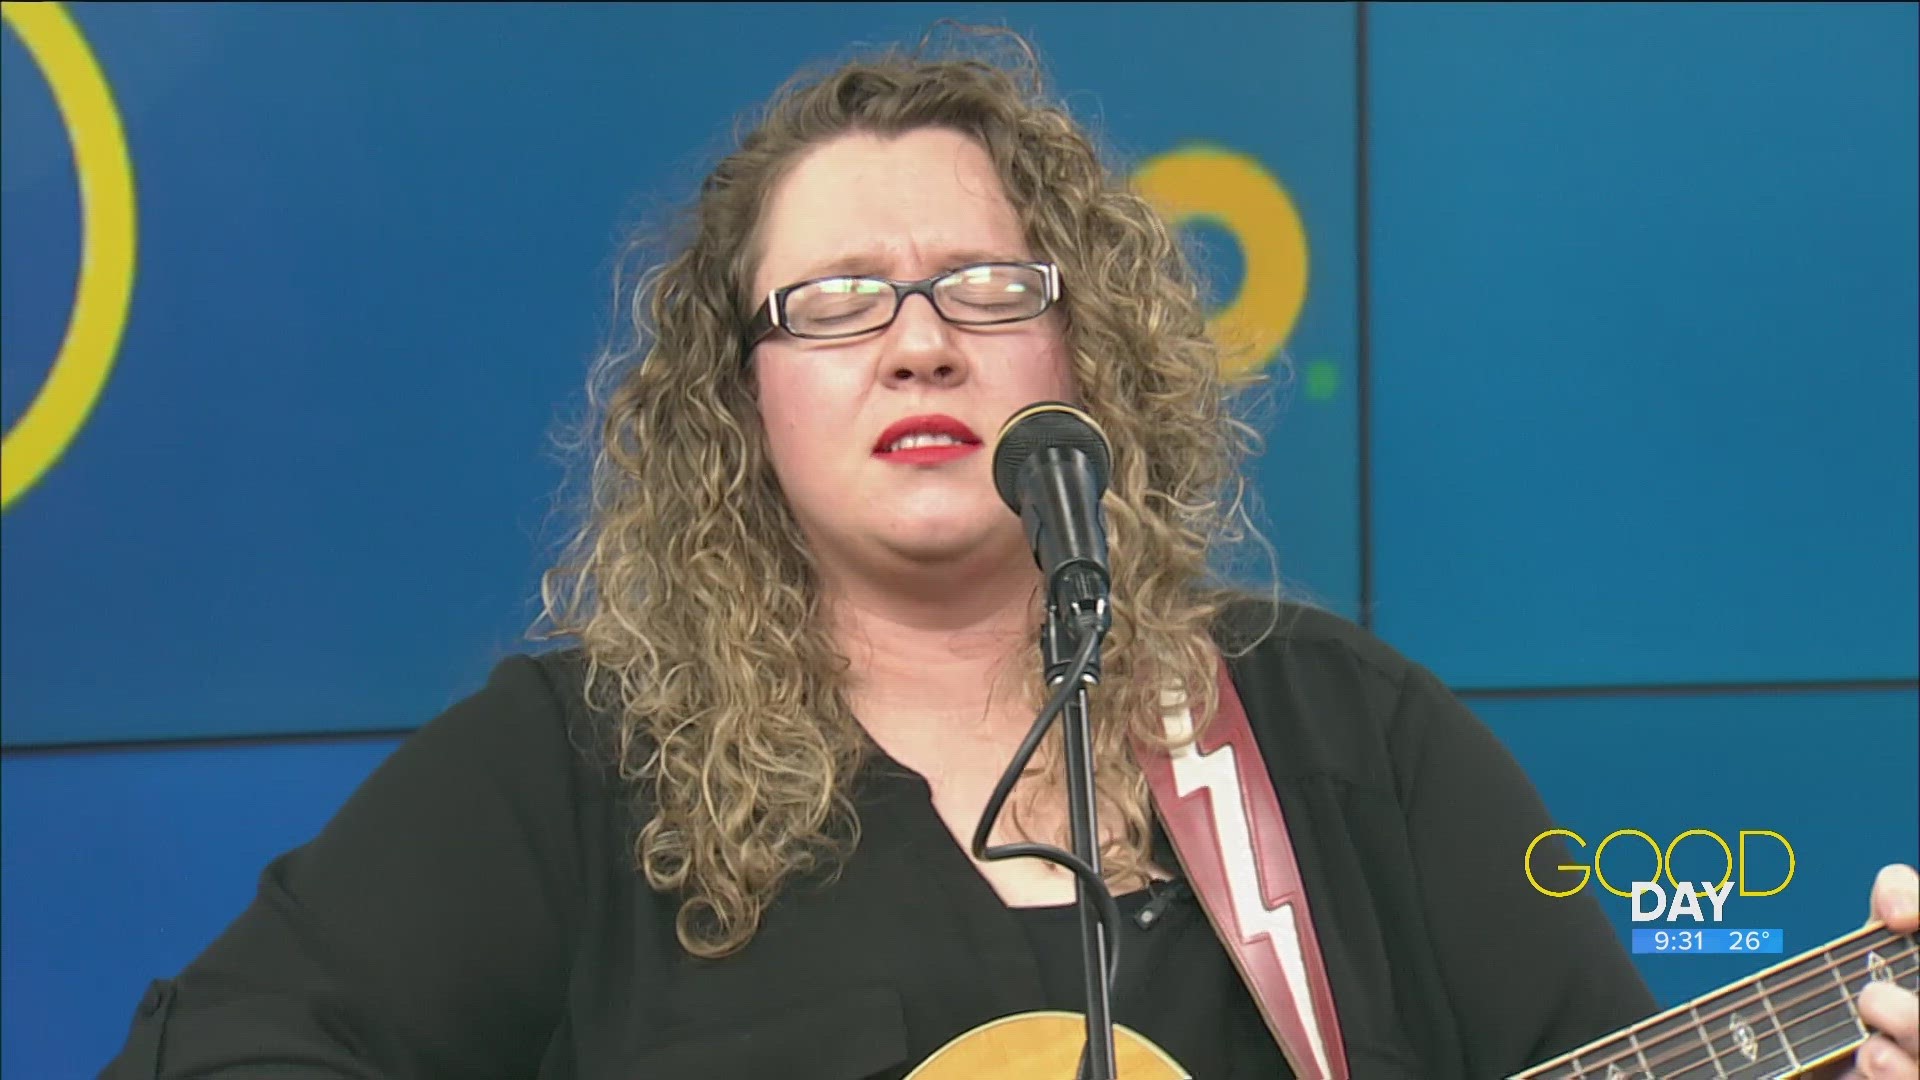 Local singer Abiggale performs her song 'Run Girl, Run' and talks how music and performance work as a part of the healing process.